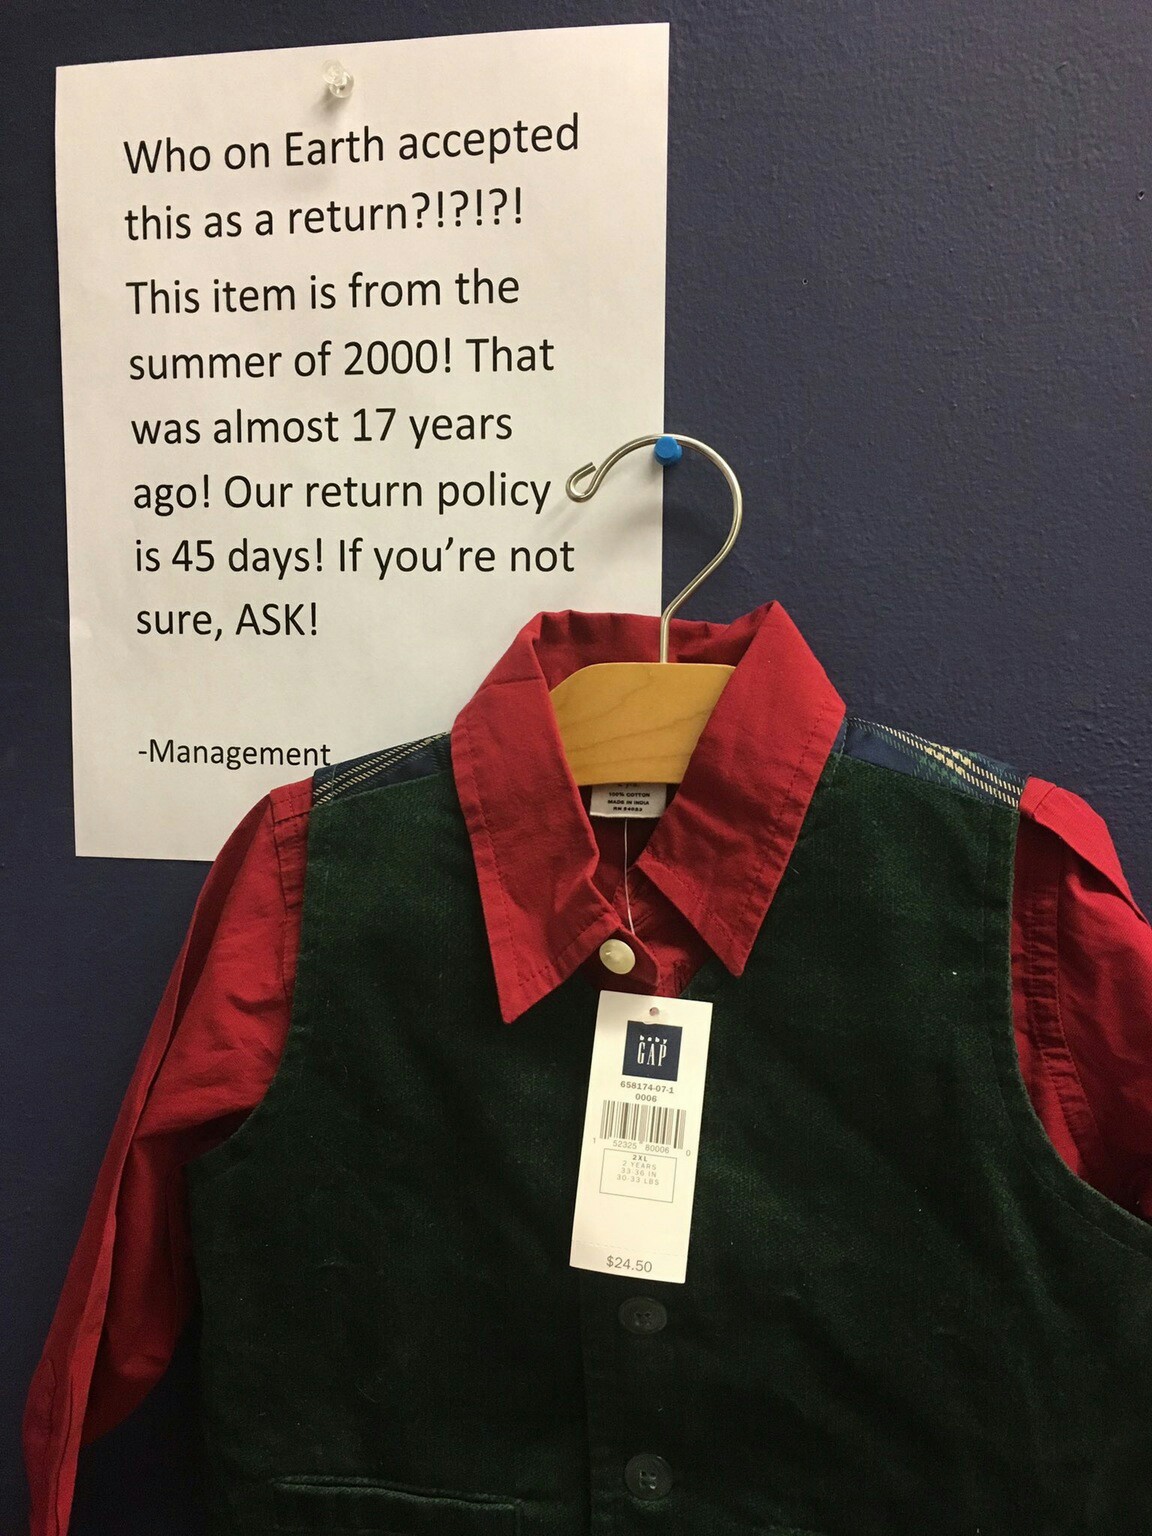 gap 17 year return - Who on Earth accepted this as a return?!?!?! This item is from the summer of 2000! That was almost 17 years ago! Our return policy is 45 days! If you're not sure, Ask! Management Www 658174071 0006 52325 800060 2033 Lbs $24.50